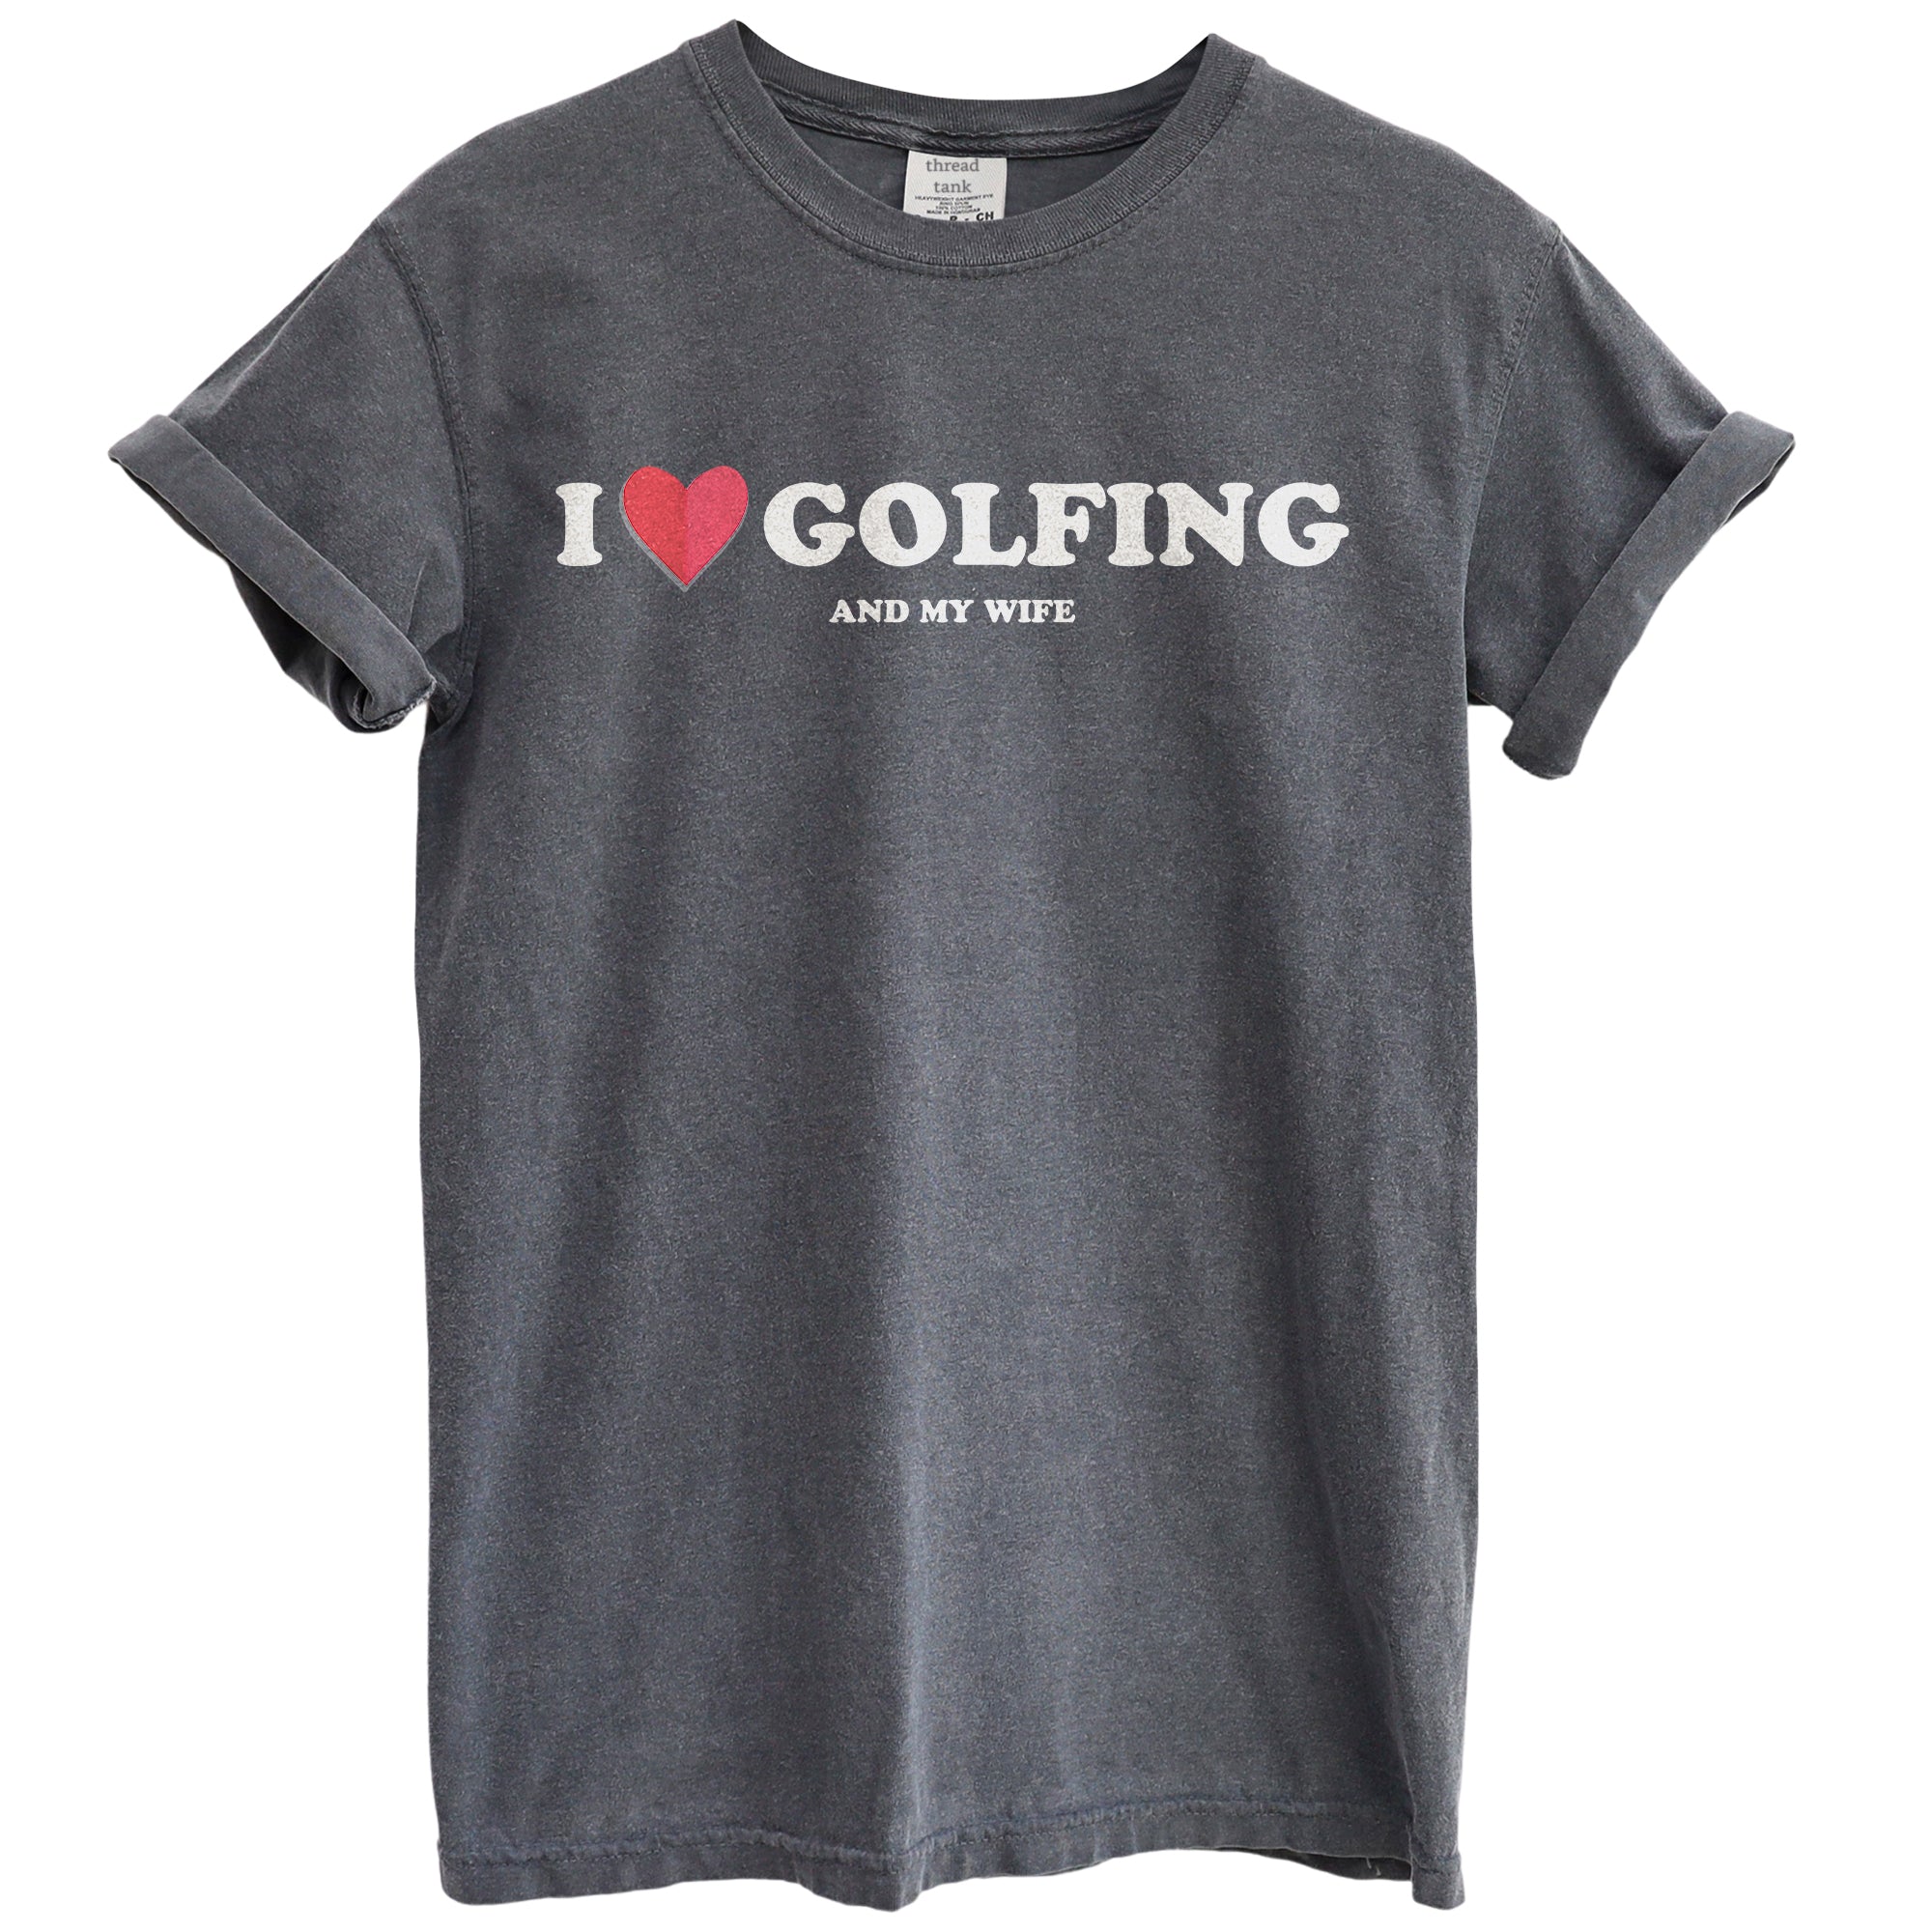 I Heart Golfing Garment-Dyed Tee - Stories You Can Wear